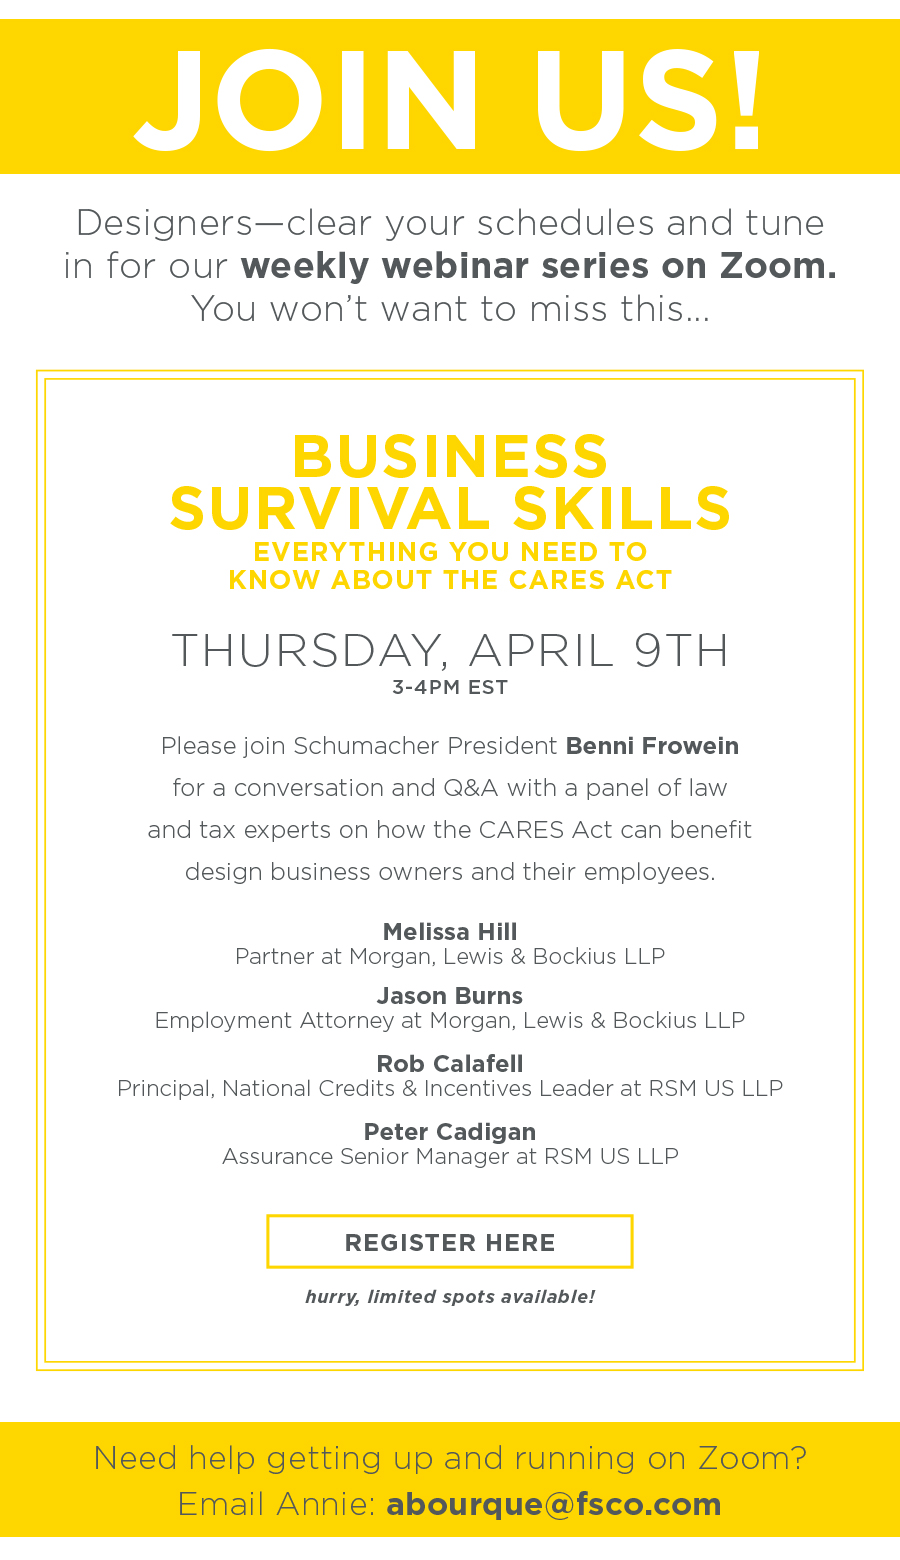 Business Survival Skills: Everything You Need to Know About the CARES Act - News from Laguna Design Center